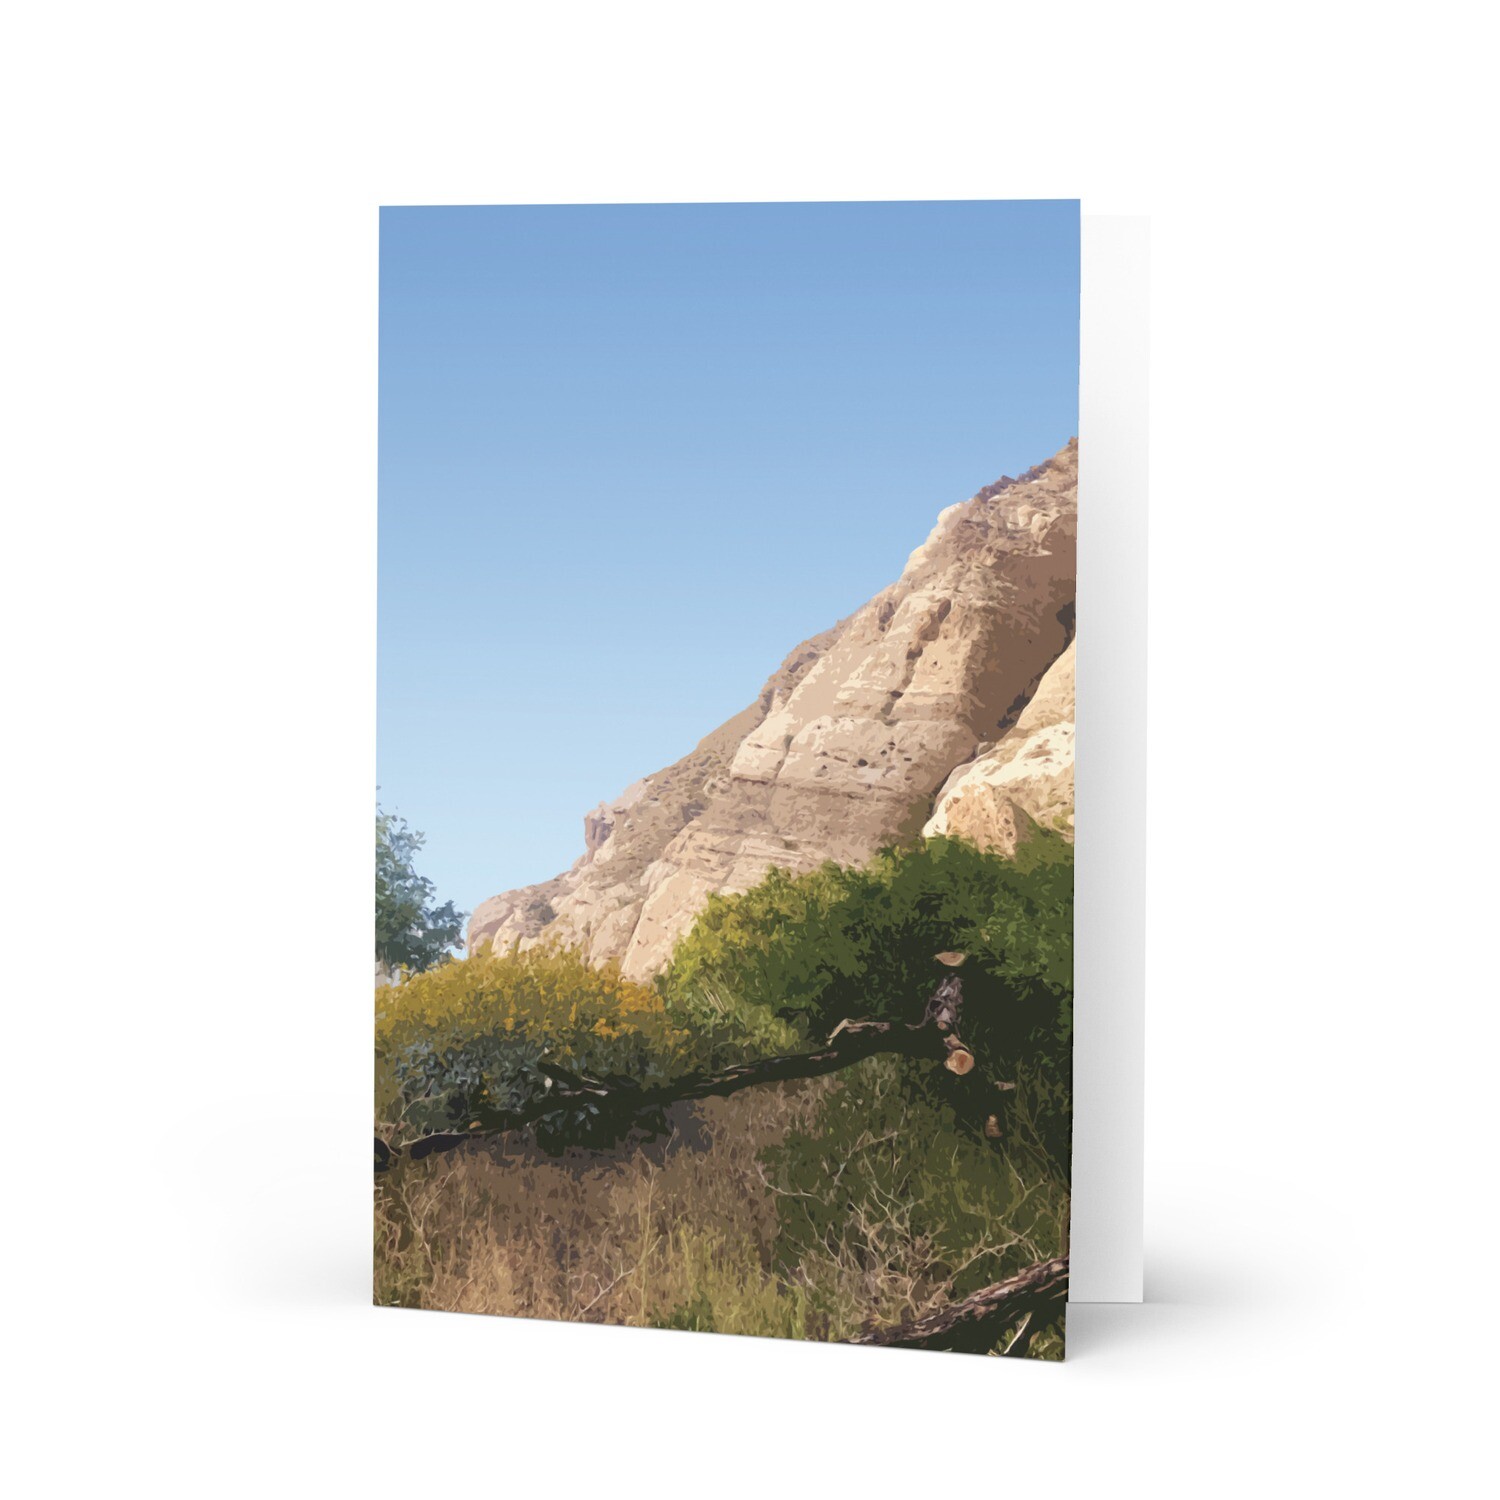 California dessert landscape, greeting card. Photography and graphic work by Edgar R. Ayala ©2022